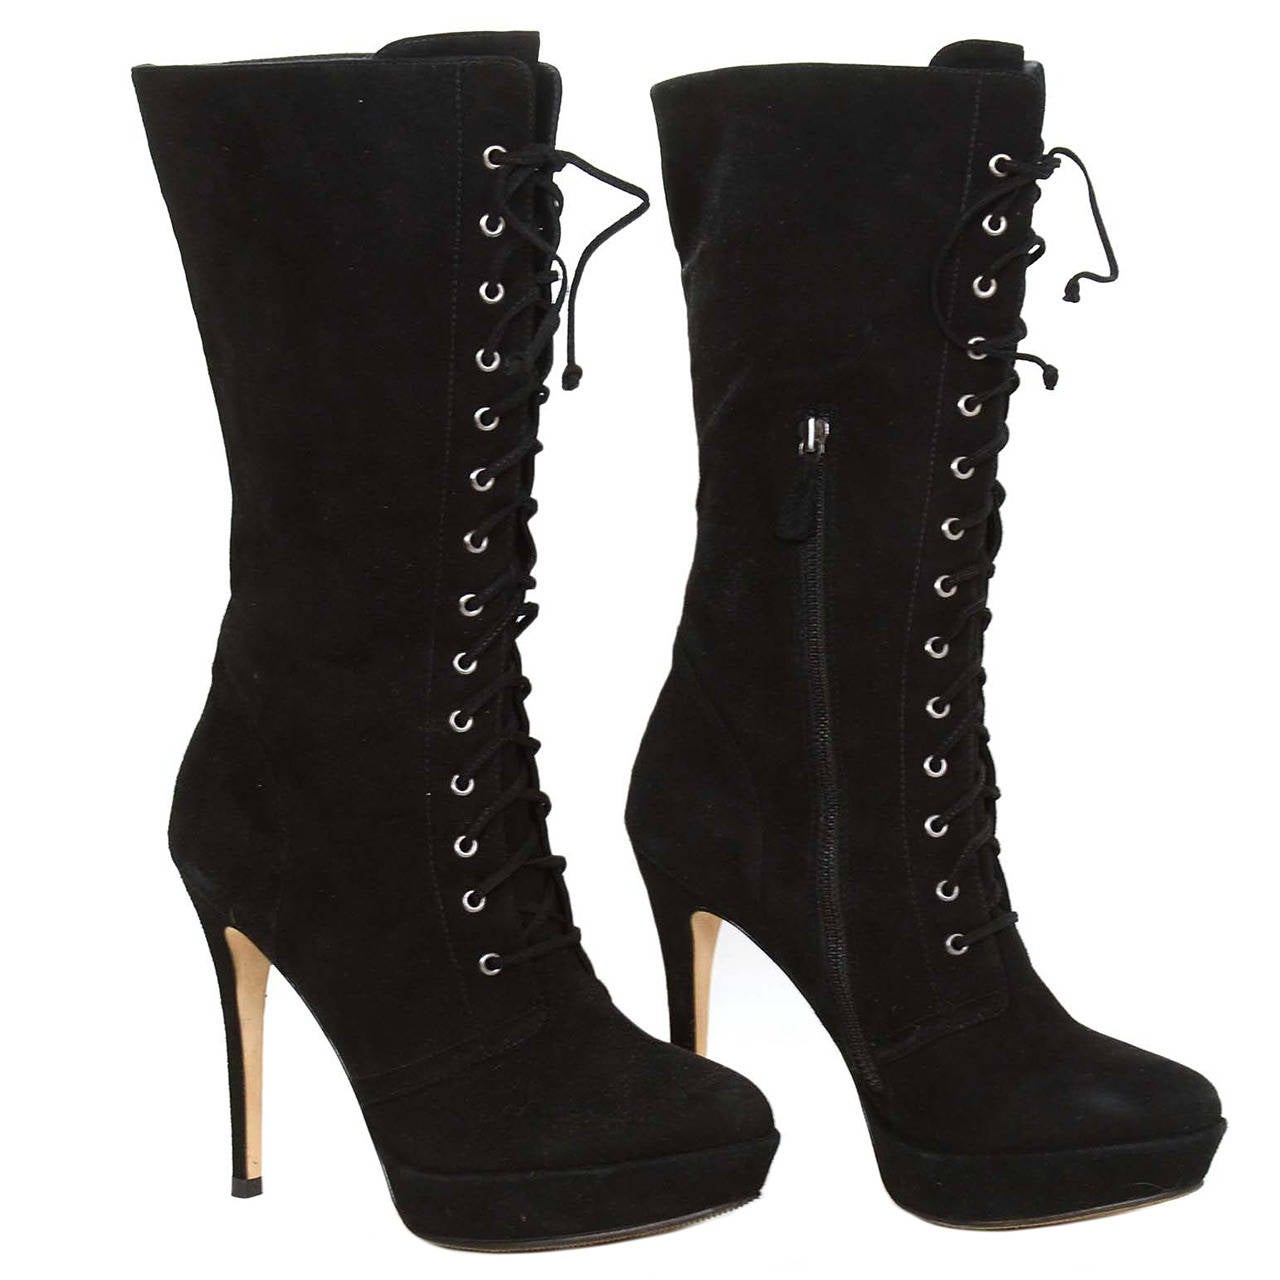 Alexandre Birman Black Suede Lace Up Boots

Made in: Brazil
Color: Black
Materials: Suede
Sole Stamp: Alexandre Birman Leather Sole
Closure/opening: Side zipper
Overall Condition: Very good pre-owned condition, some scuffs to the suede and the boots